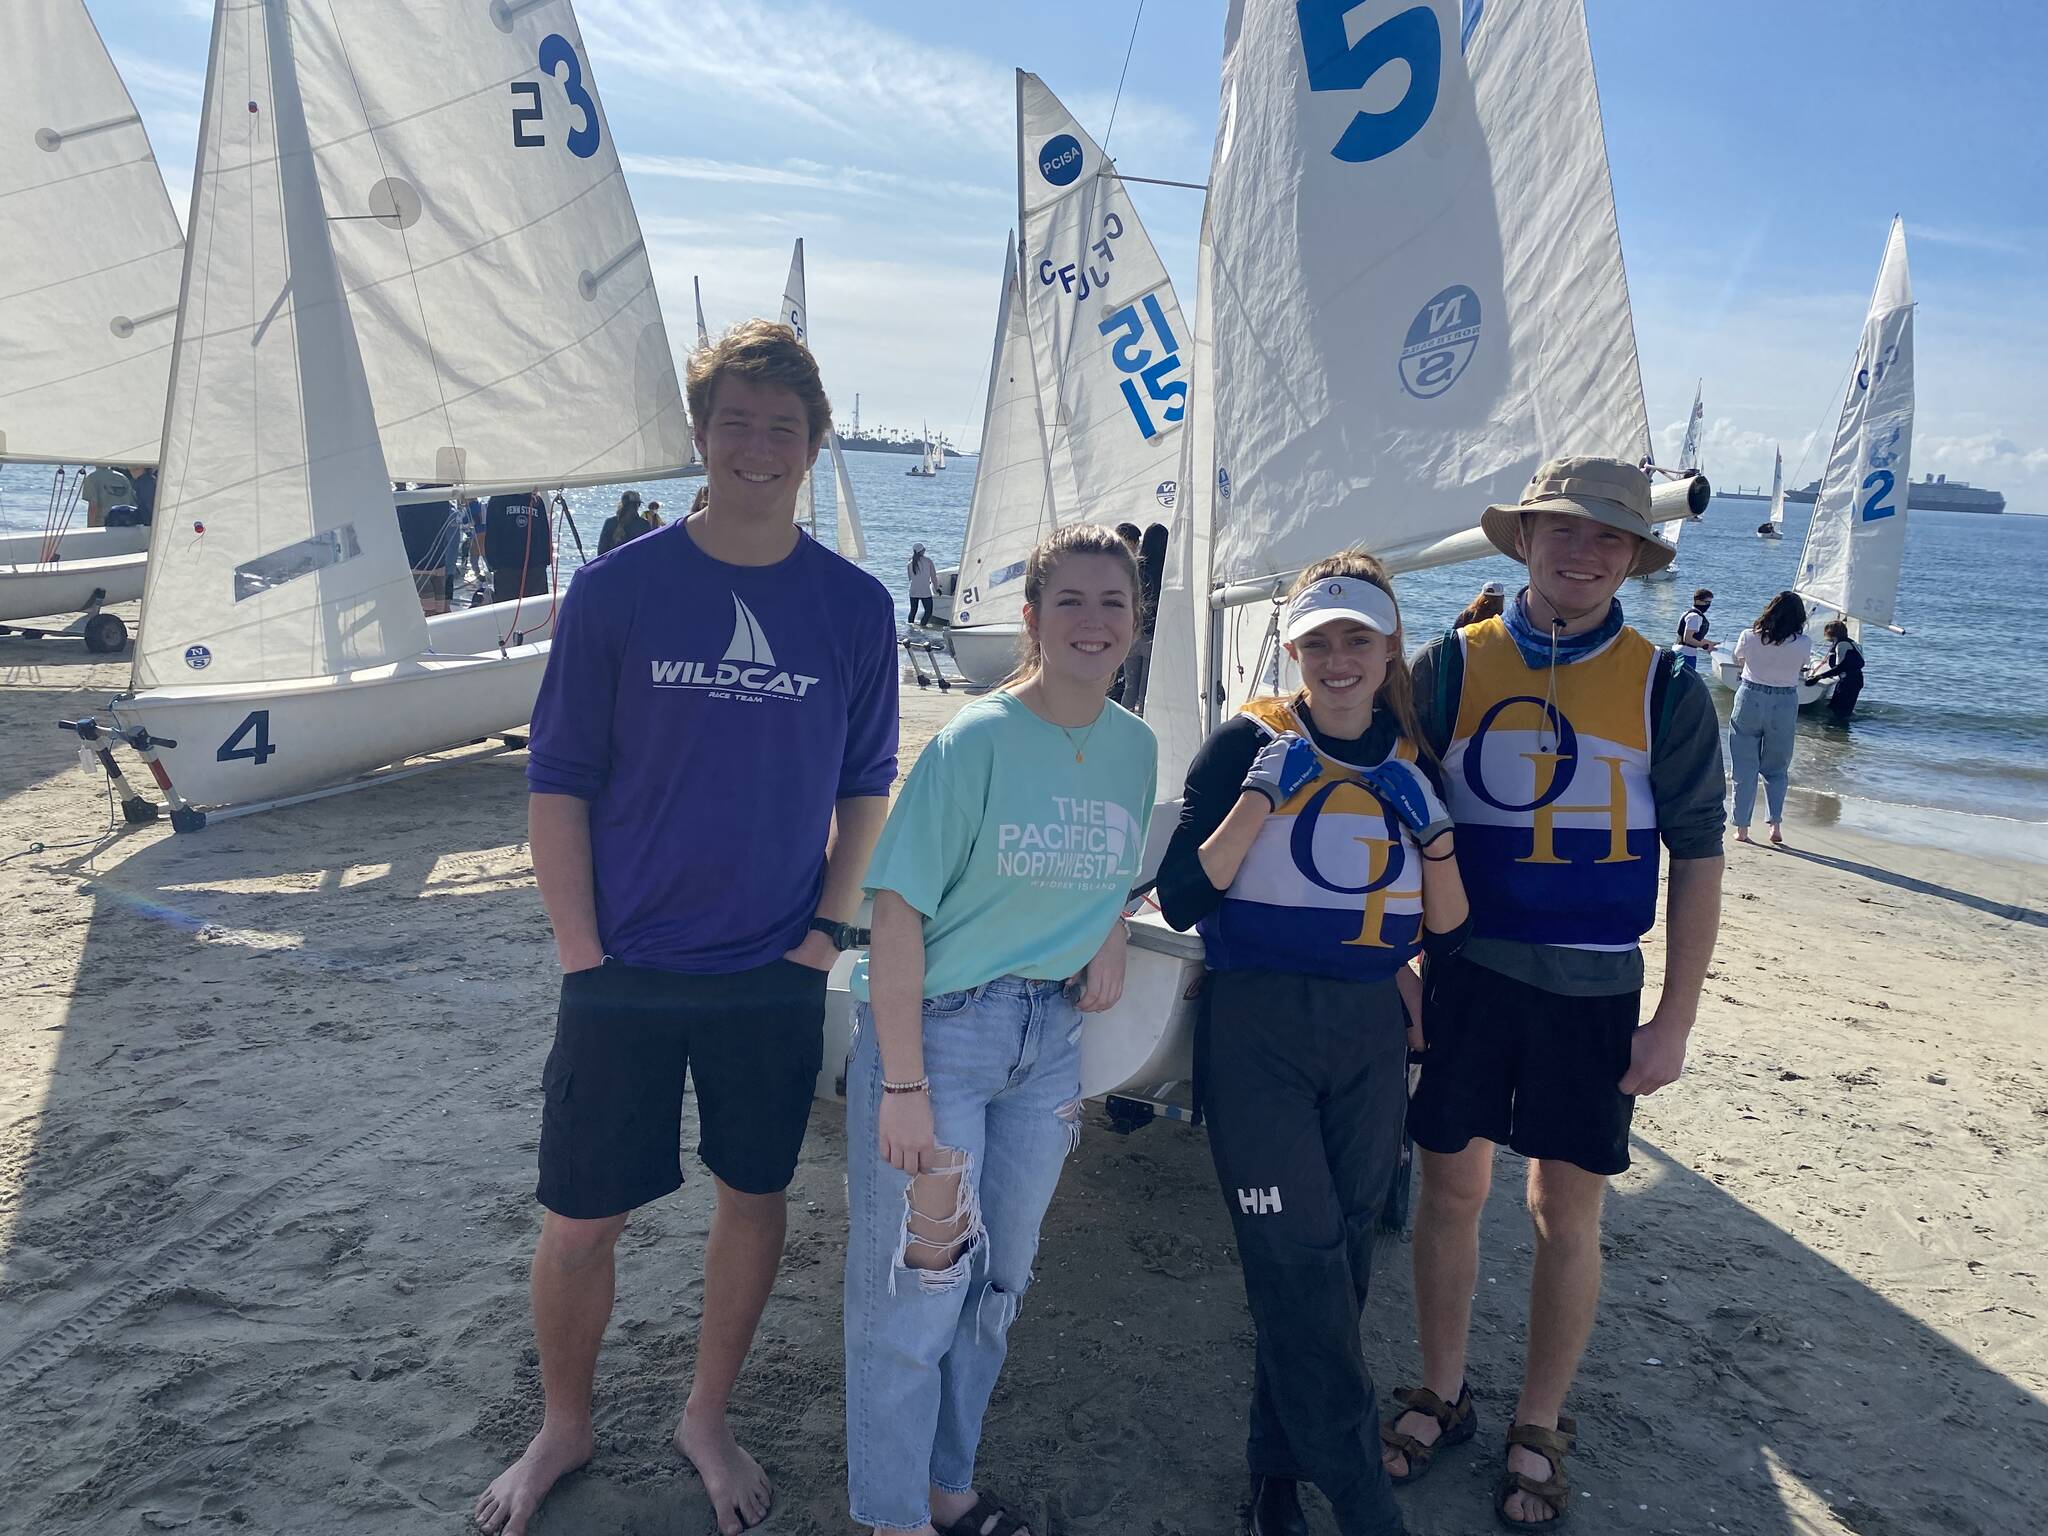 Photo by Shawn O’Connor
The Wildcat Sailing team, from left to right, are sophomore Colin Byler, junior Shelby Lang, senior Emelia Boilek and senior Ryan Metz.